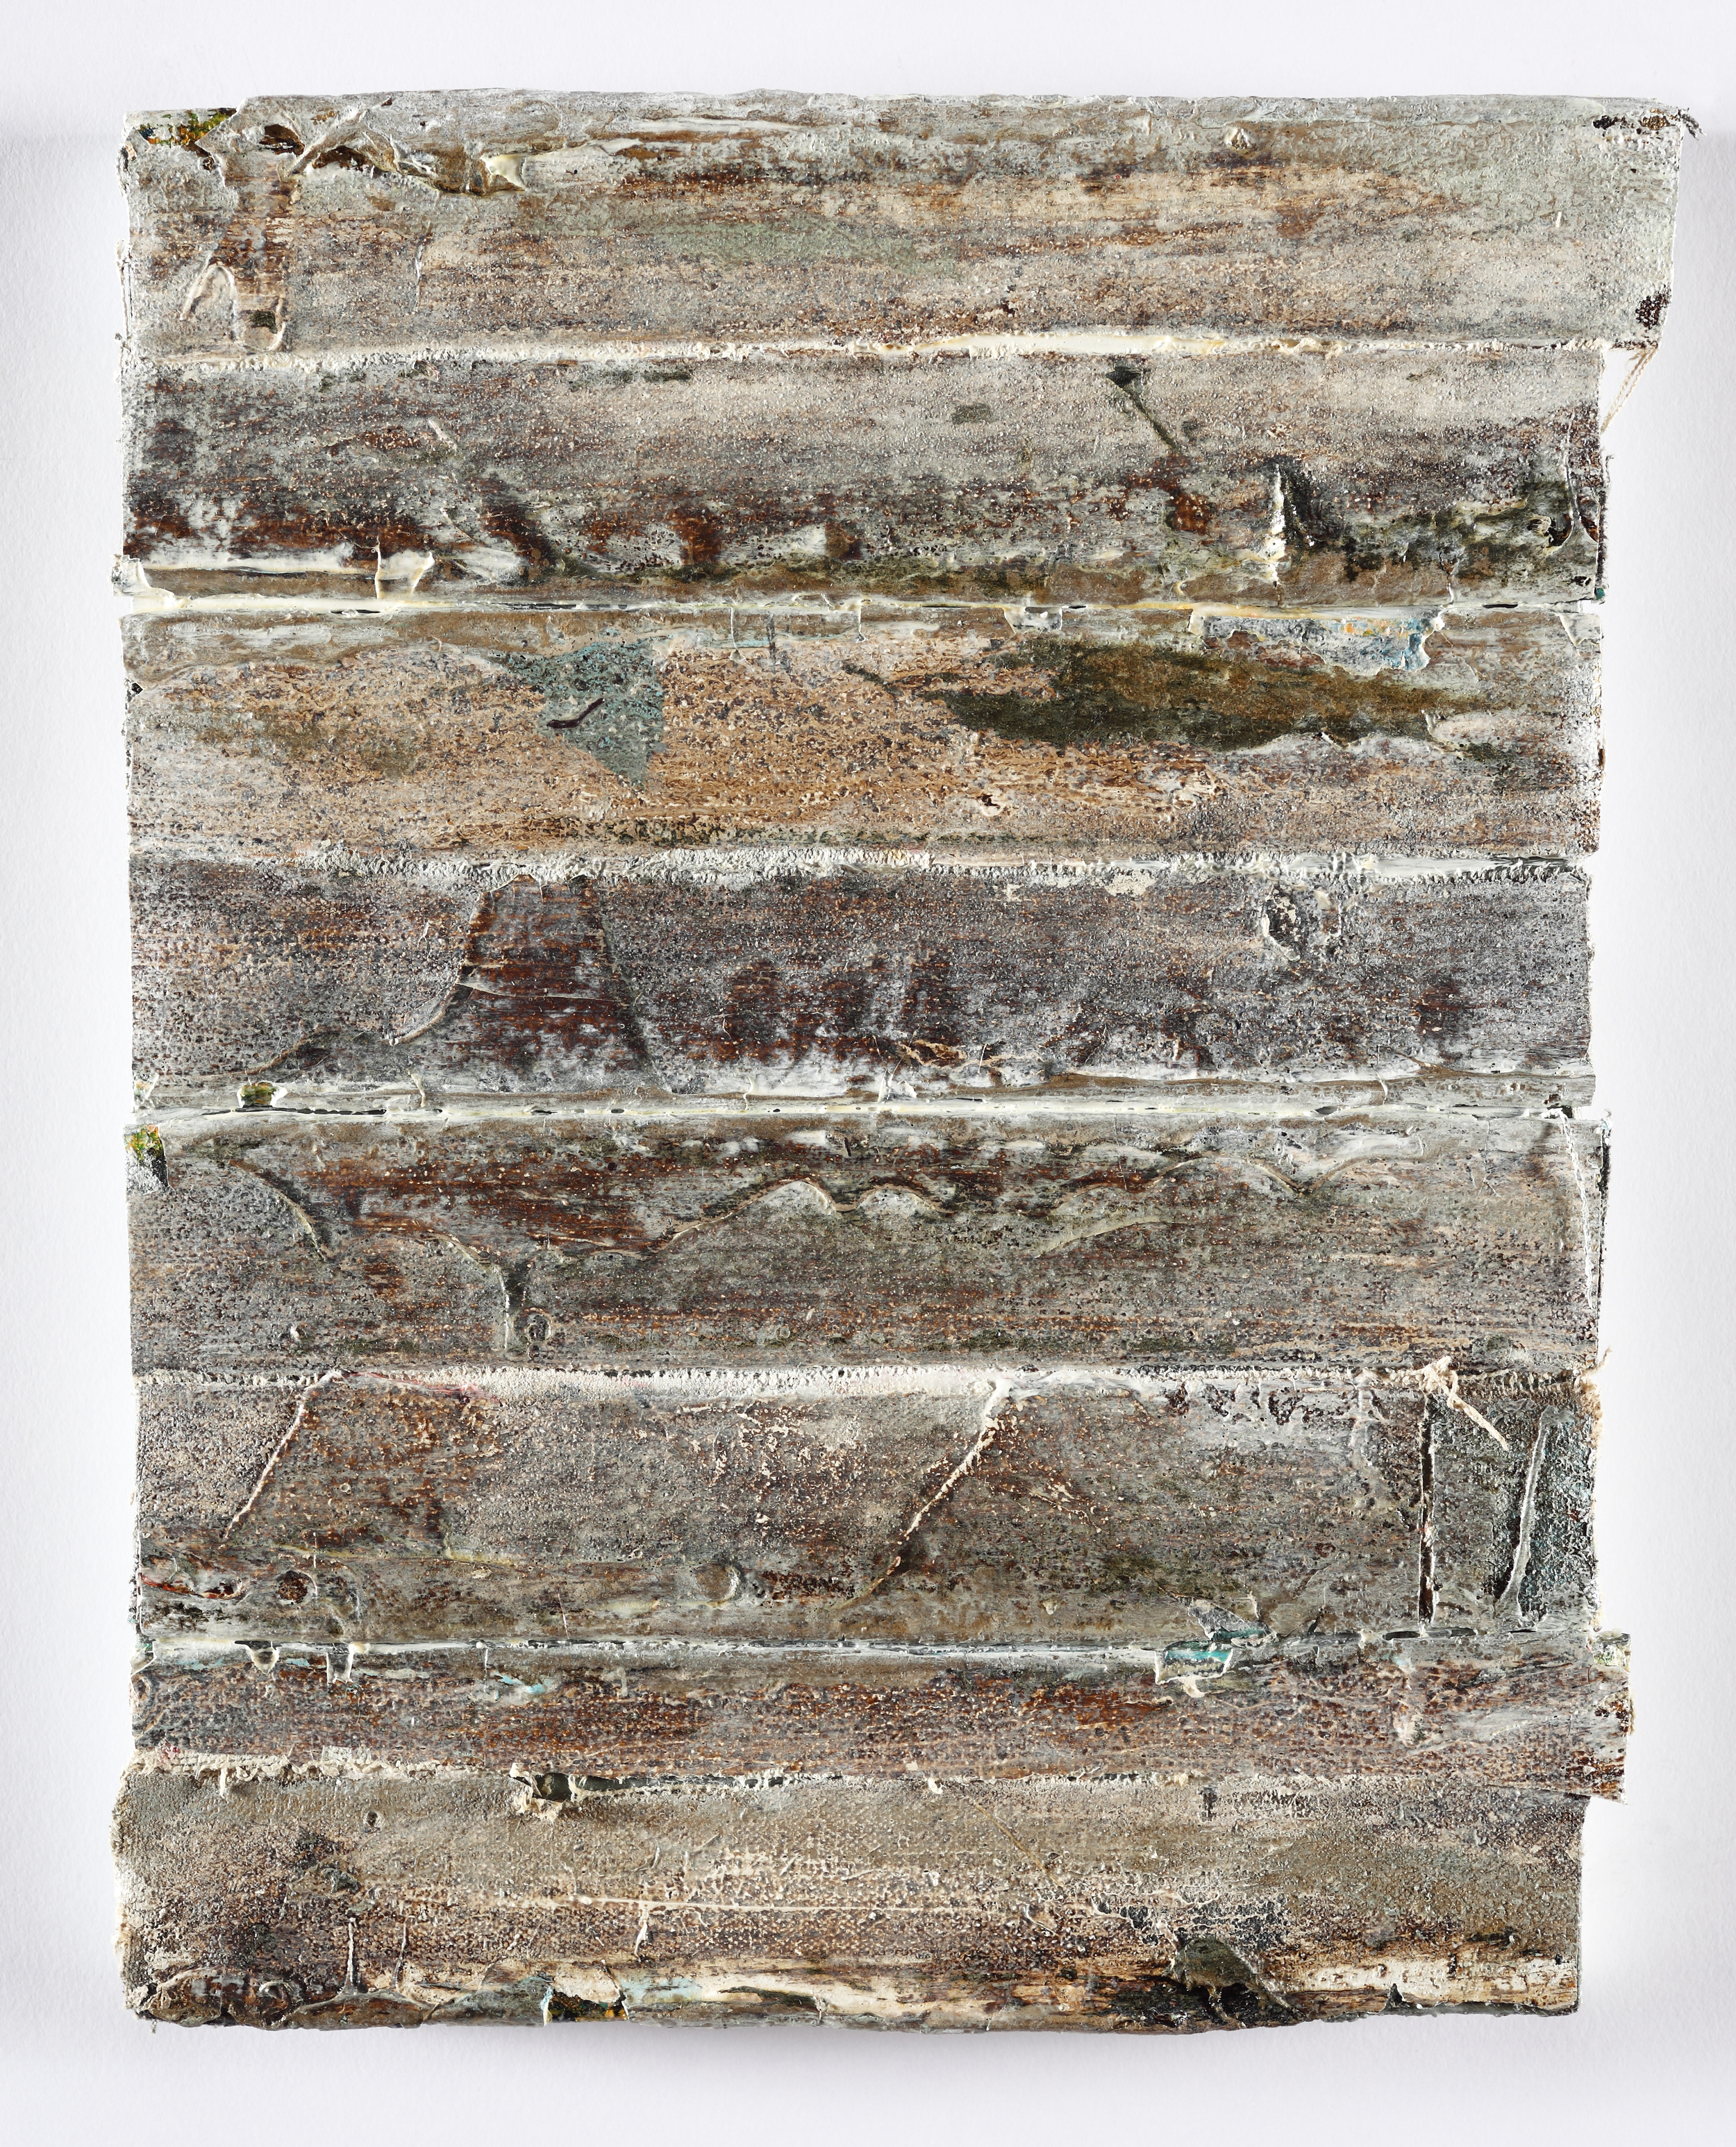   edges, (pavement)   oil on salvaged canvas mounted on panel, 9x12", 2012  collection of Martina Windels 